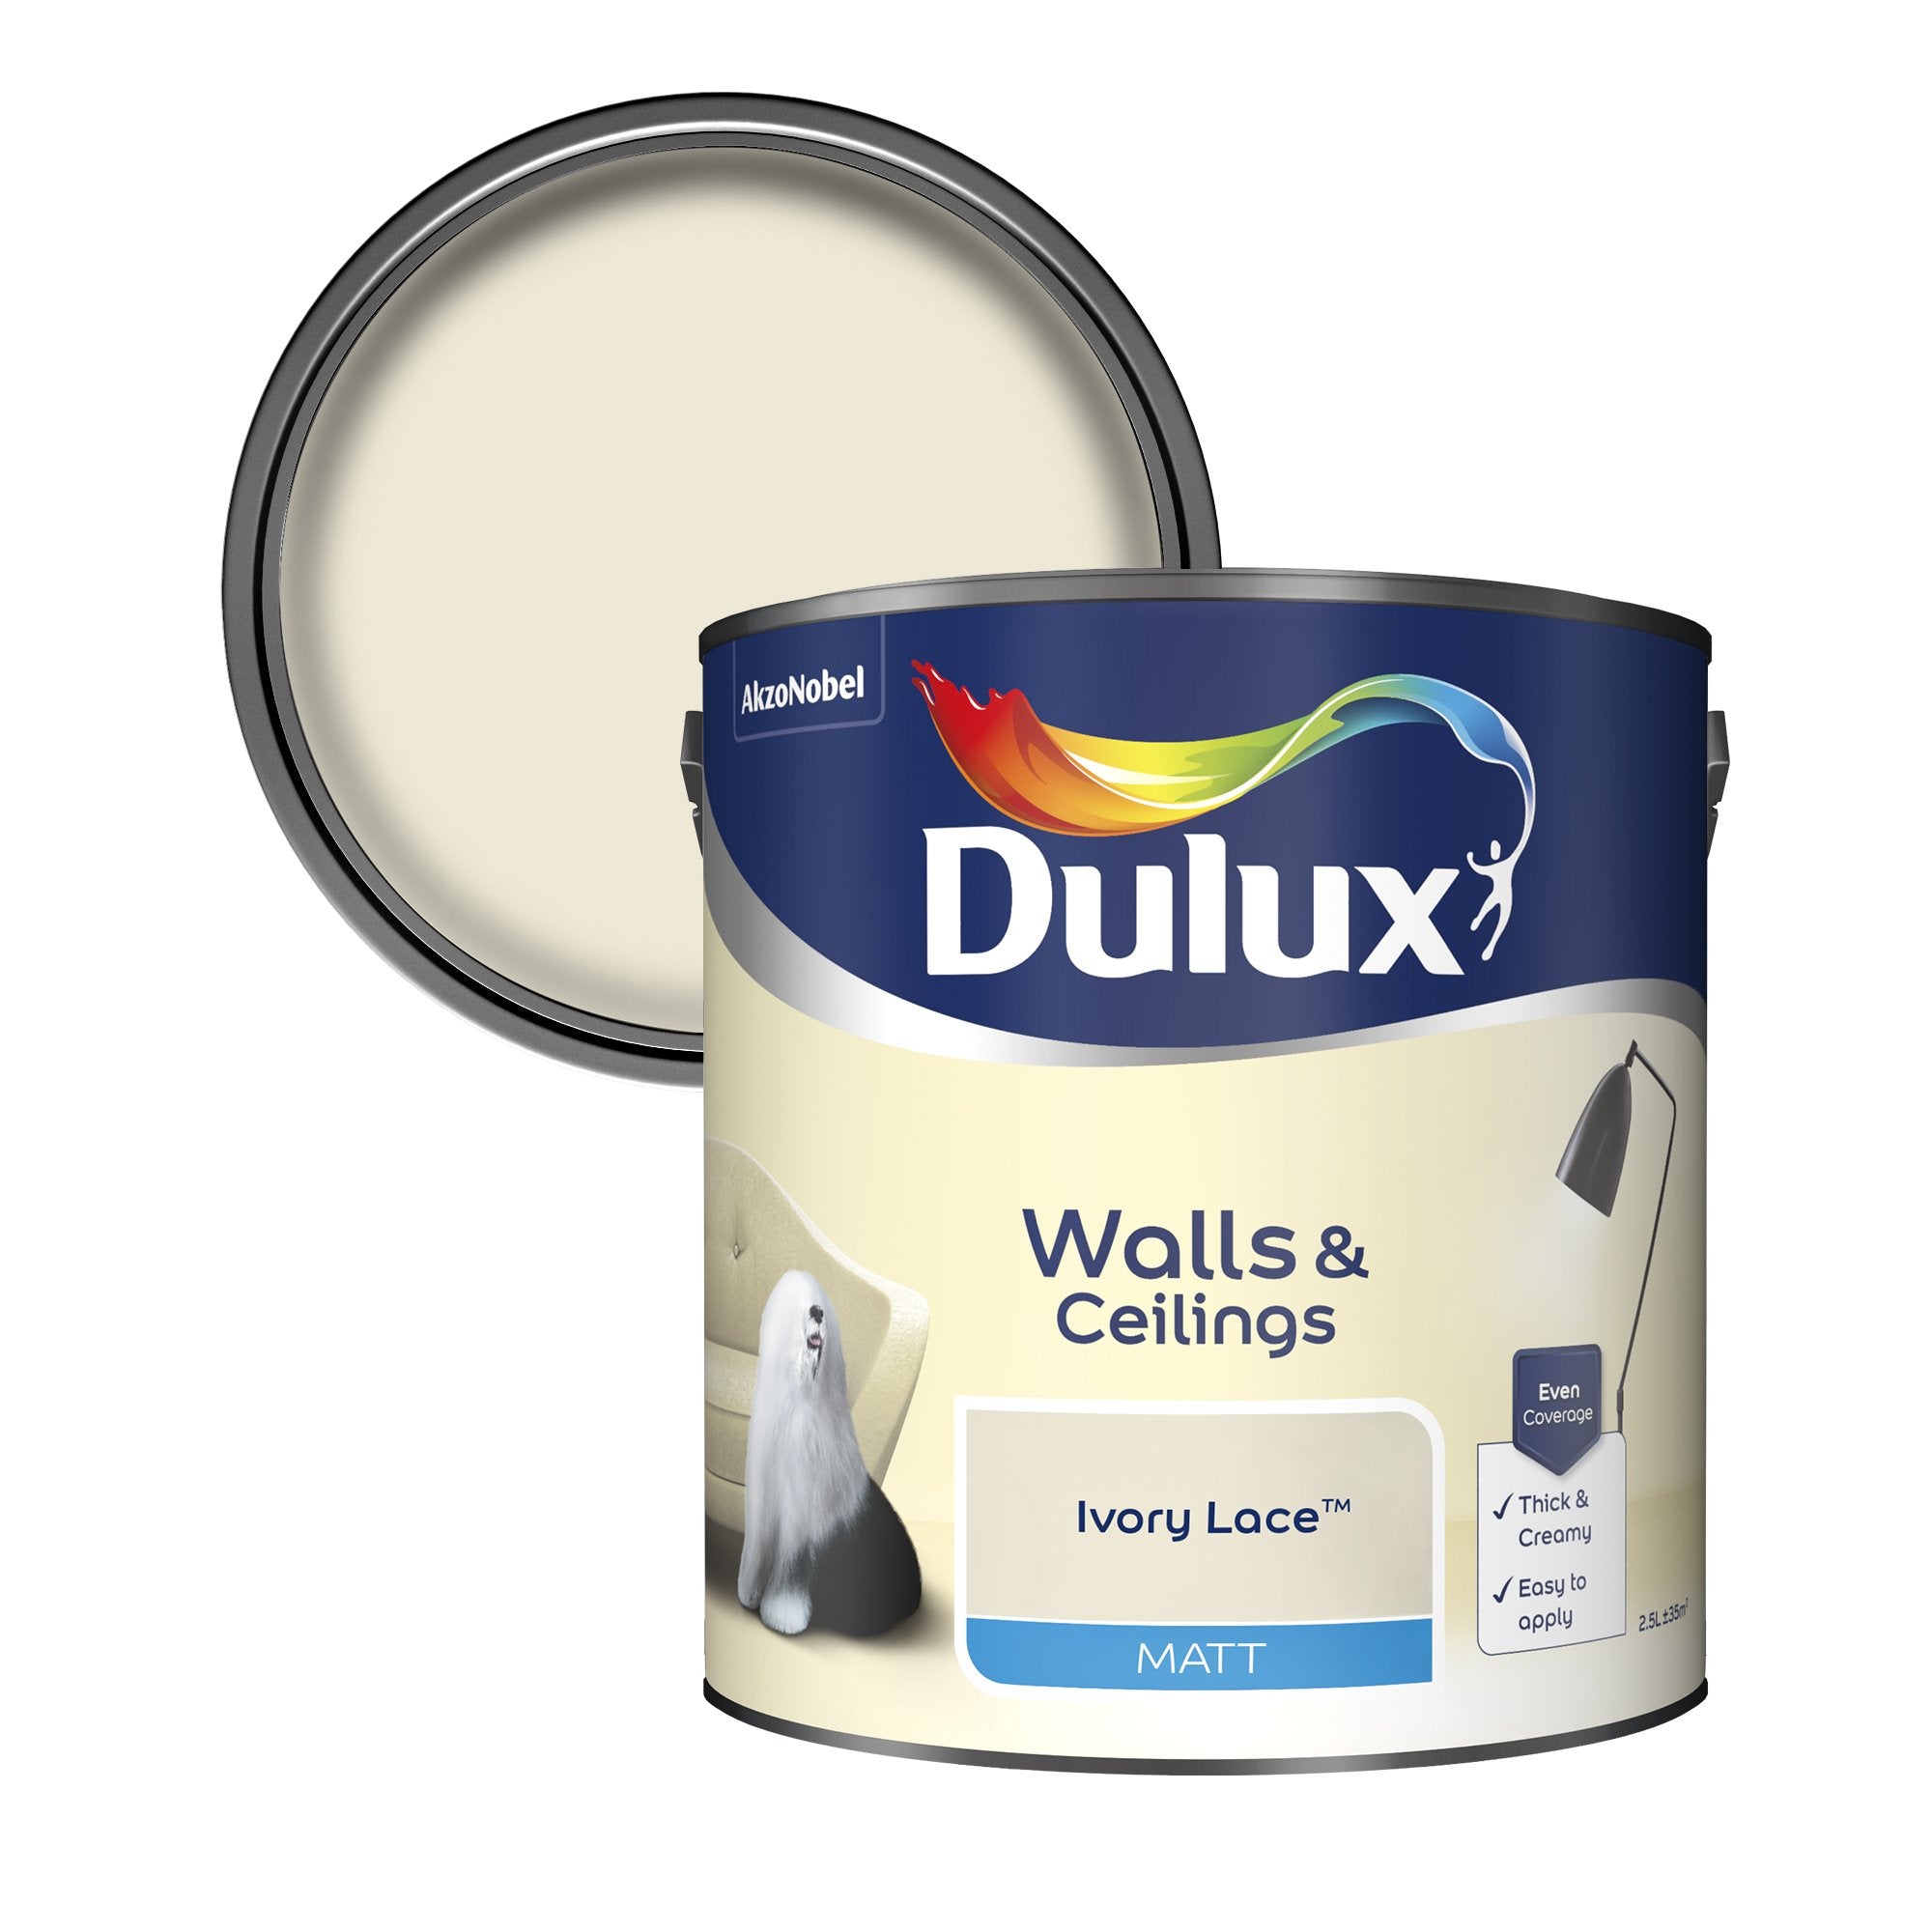 Dulux-Matt-Emulsion-Paint-For-Walls-And-Ceilings-Ivory-Lace-2.5L